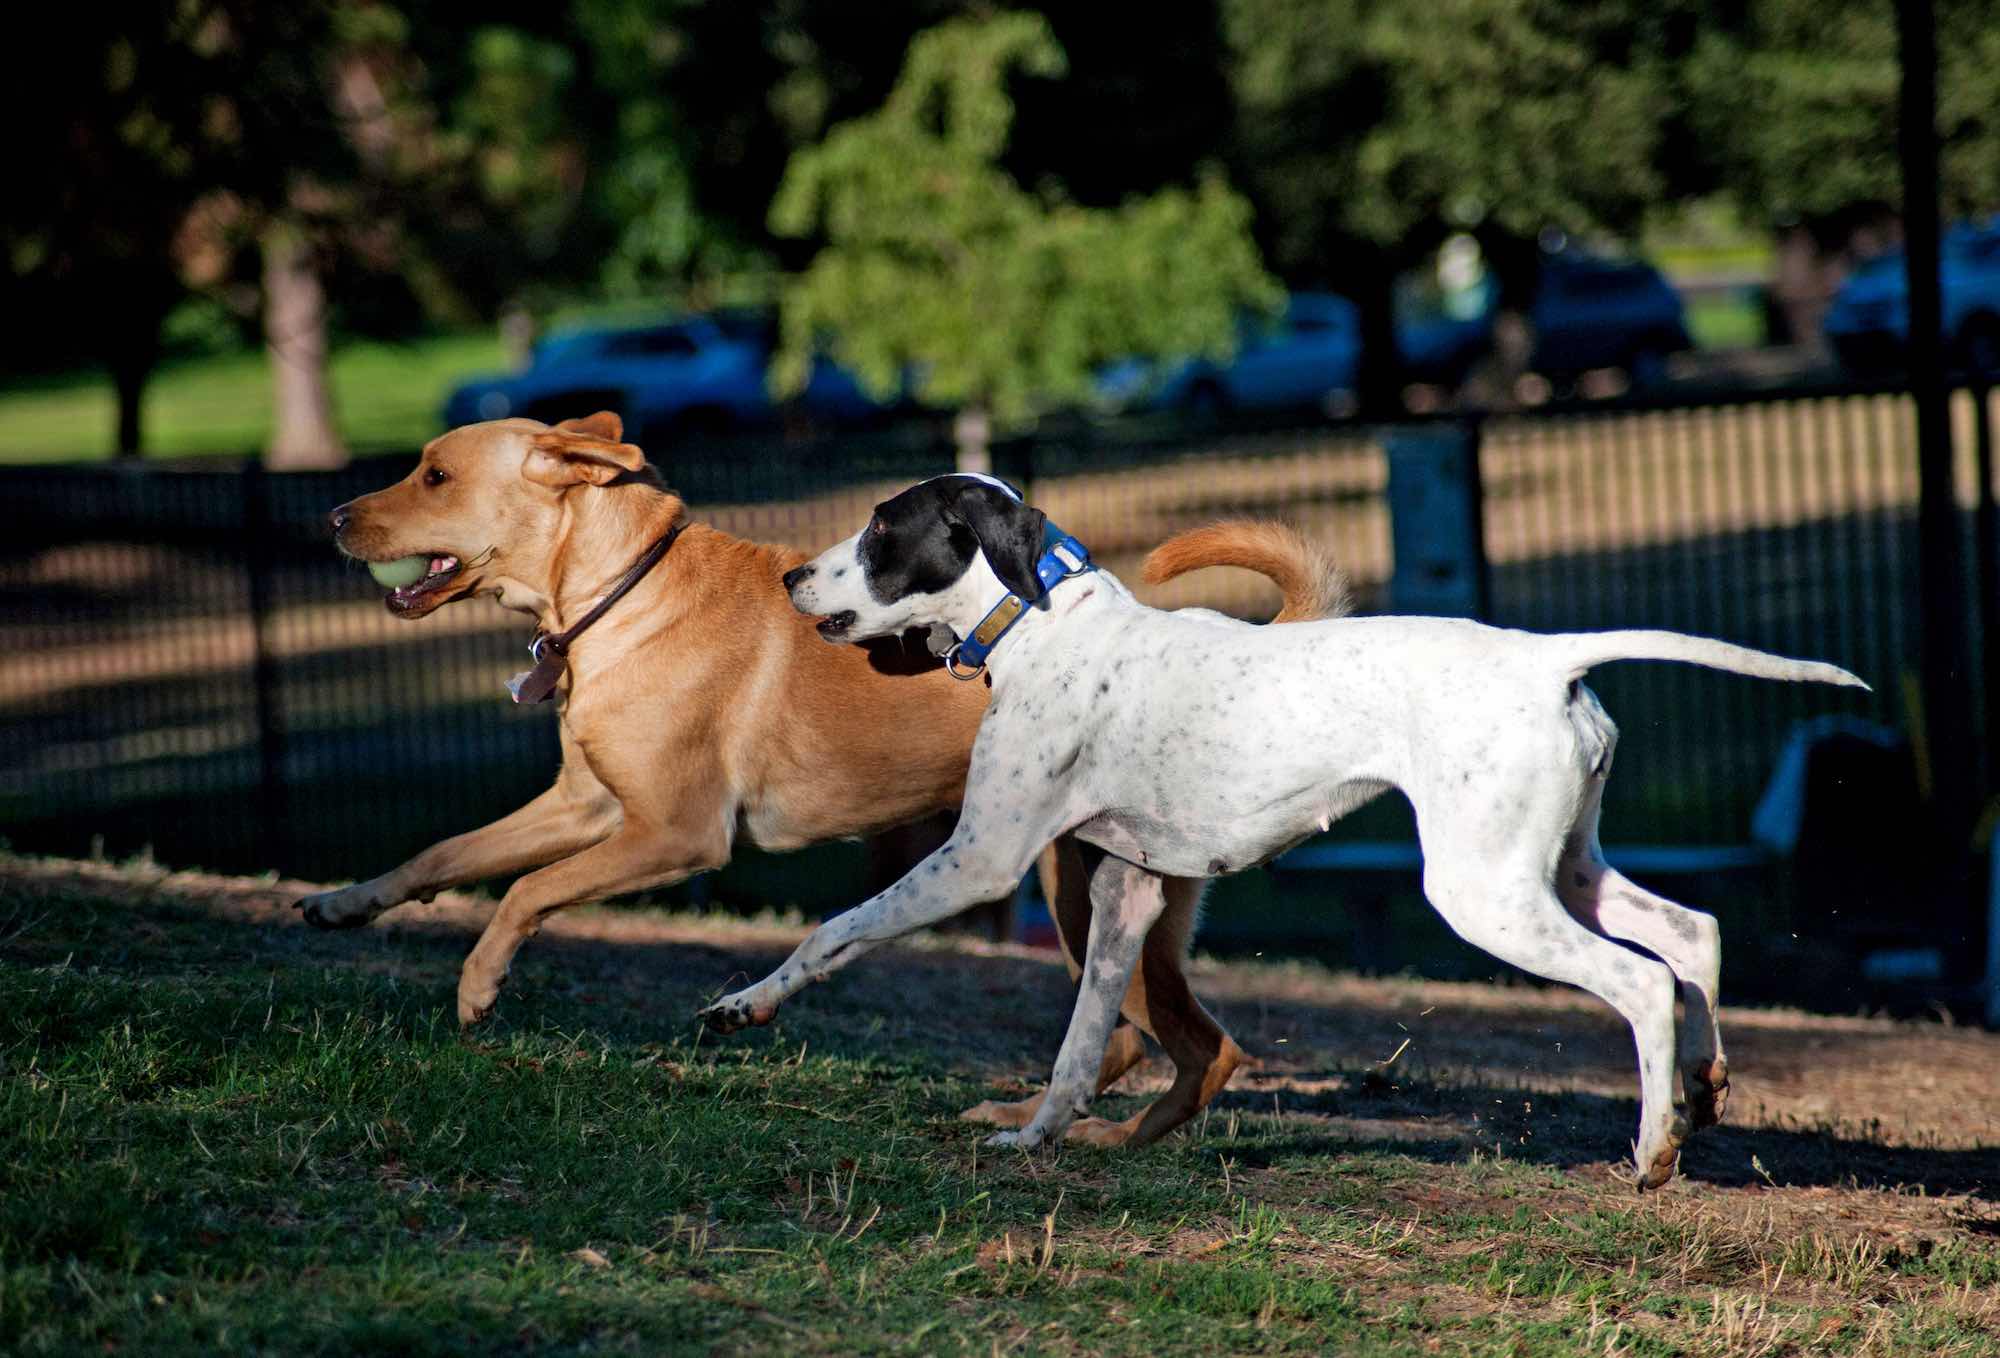 Bonnie plays with friend at Partner Park. Photo by Janet Fullwood.